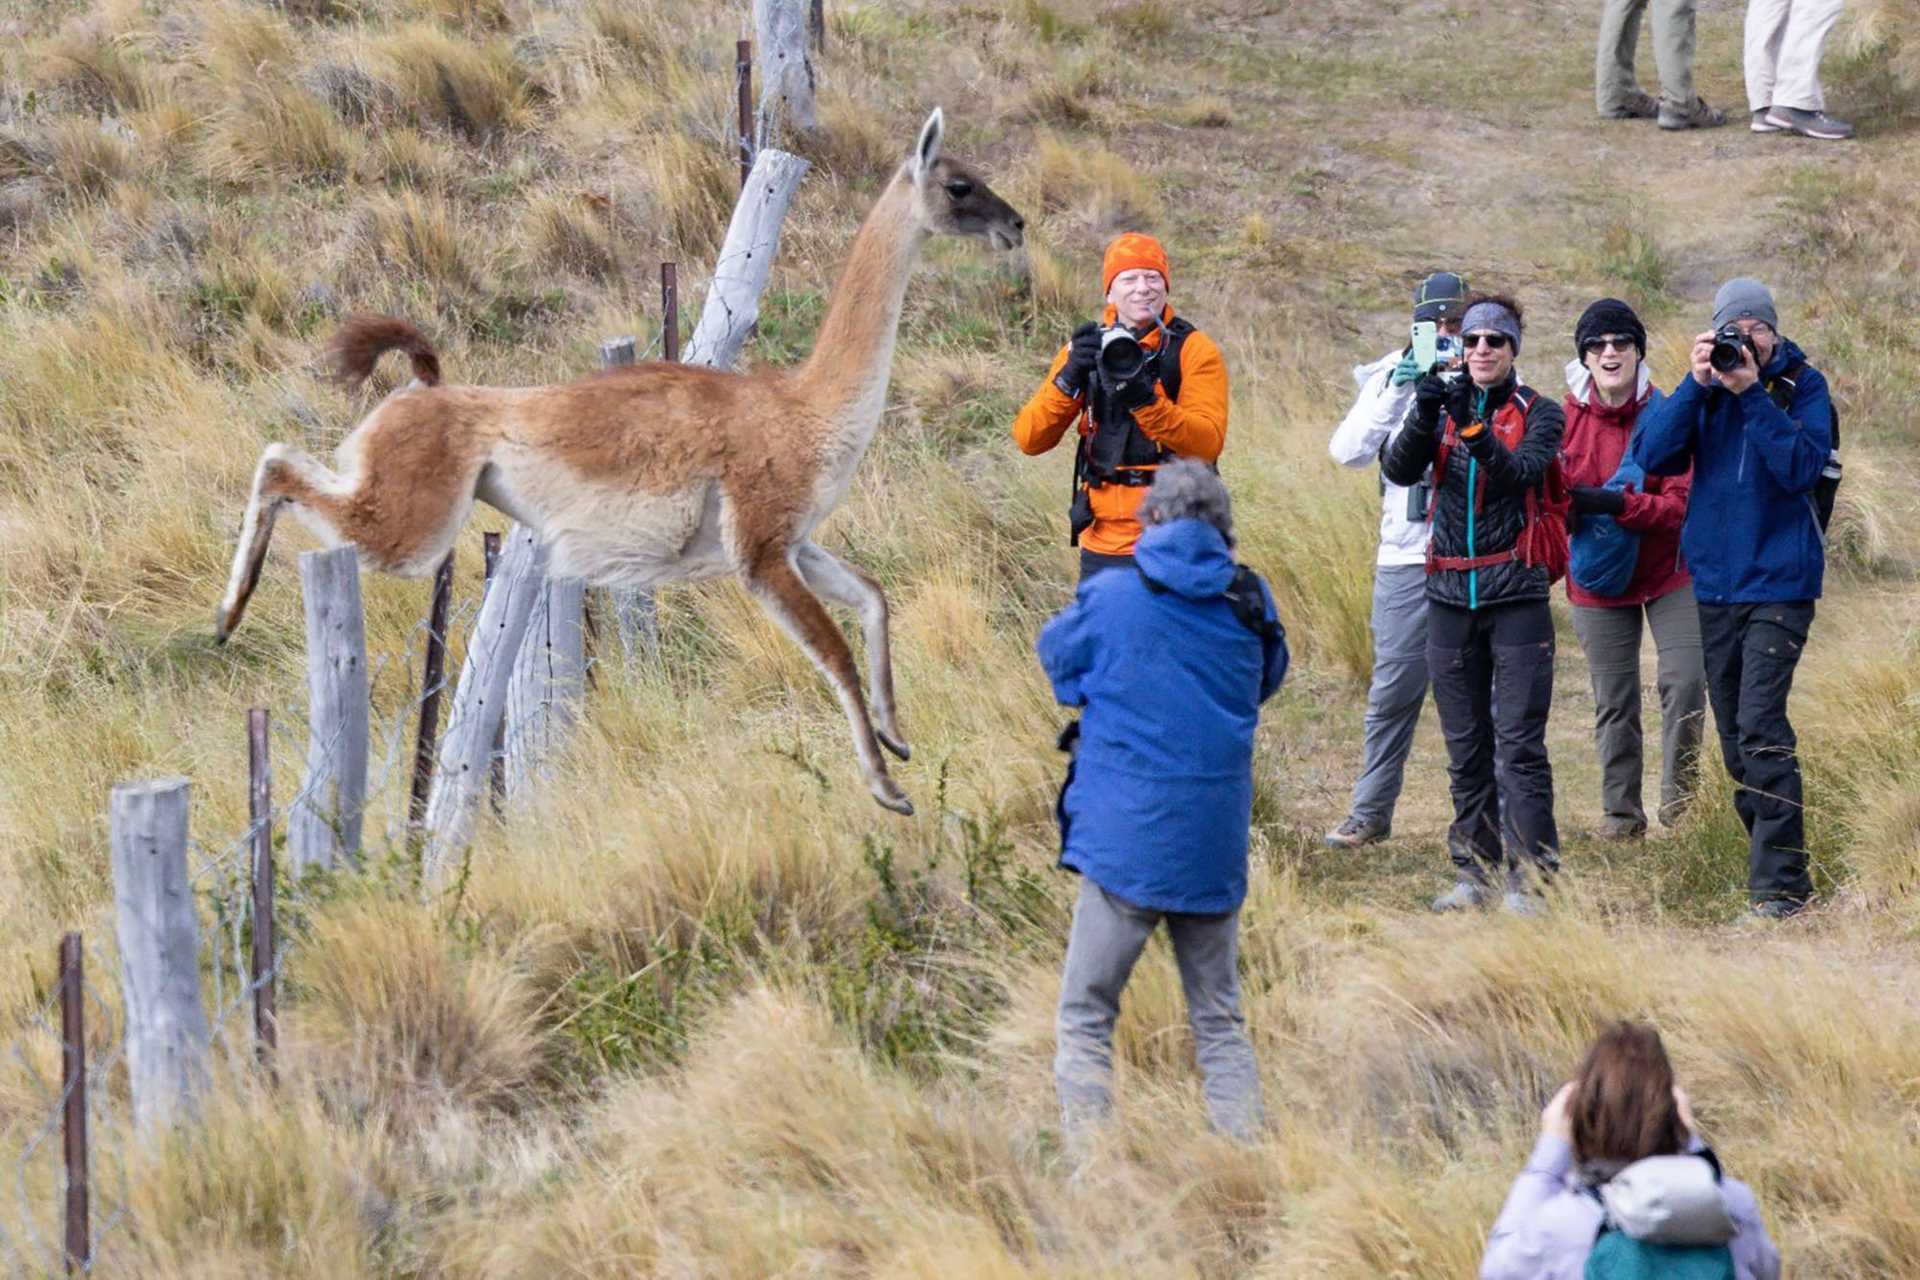 guanaco running in front of surprised humans